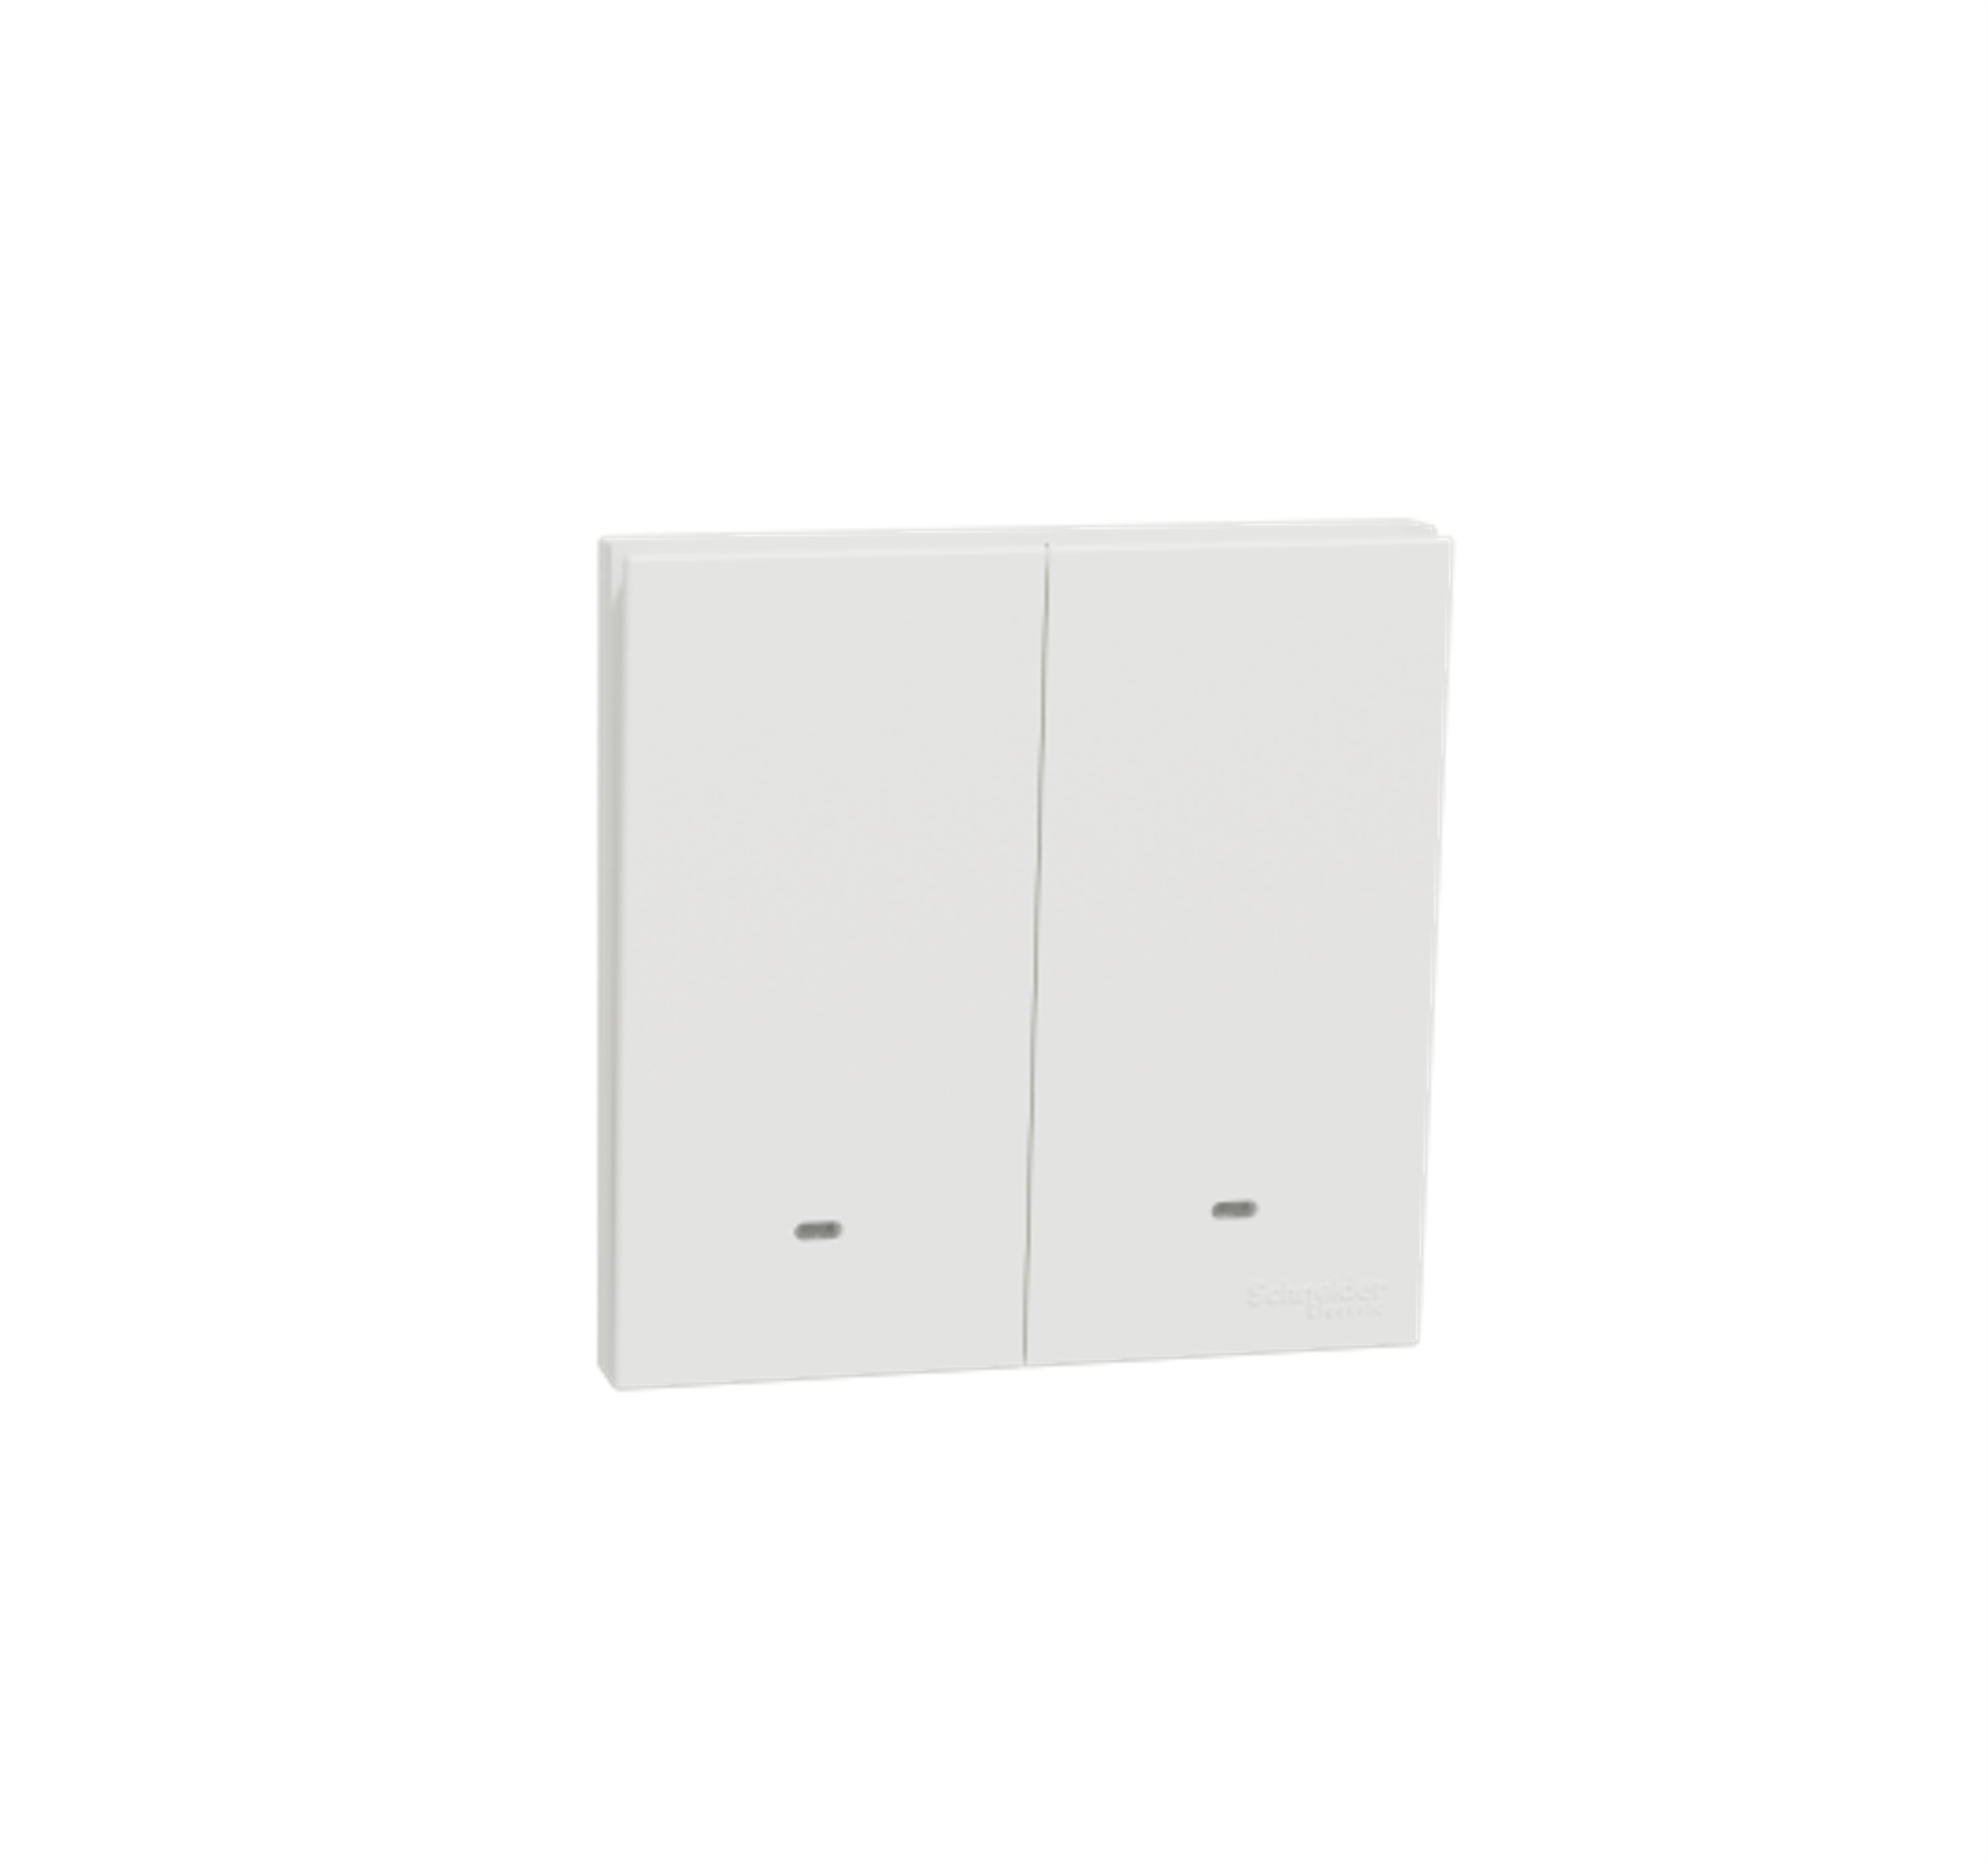 AvatarOn C - 10A 250V 2 Gang Momentary Switch with Fluorescent Lamp (White)